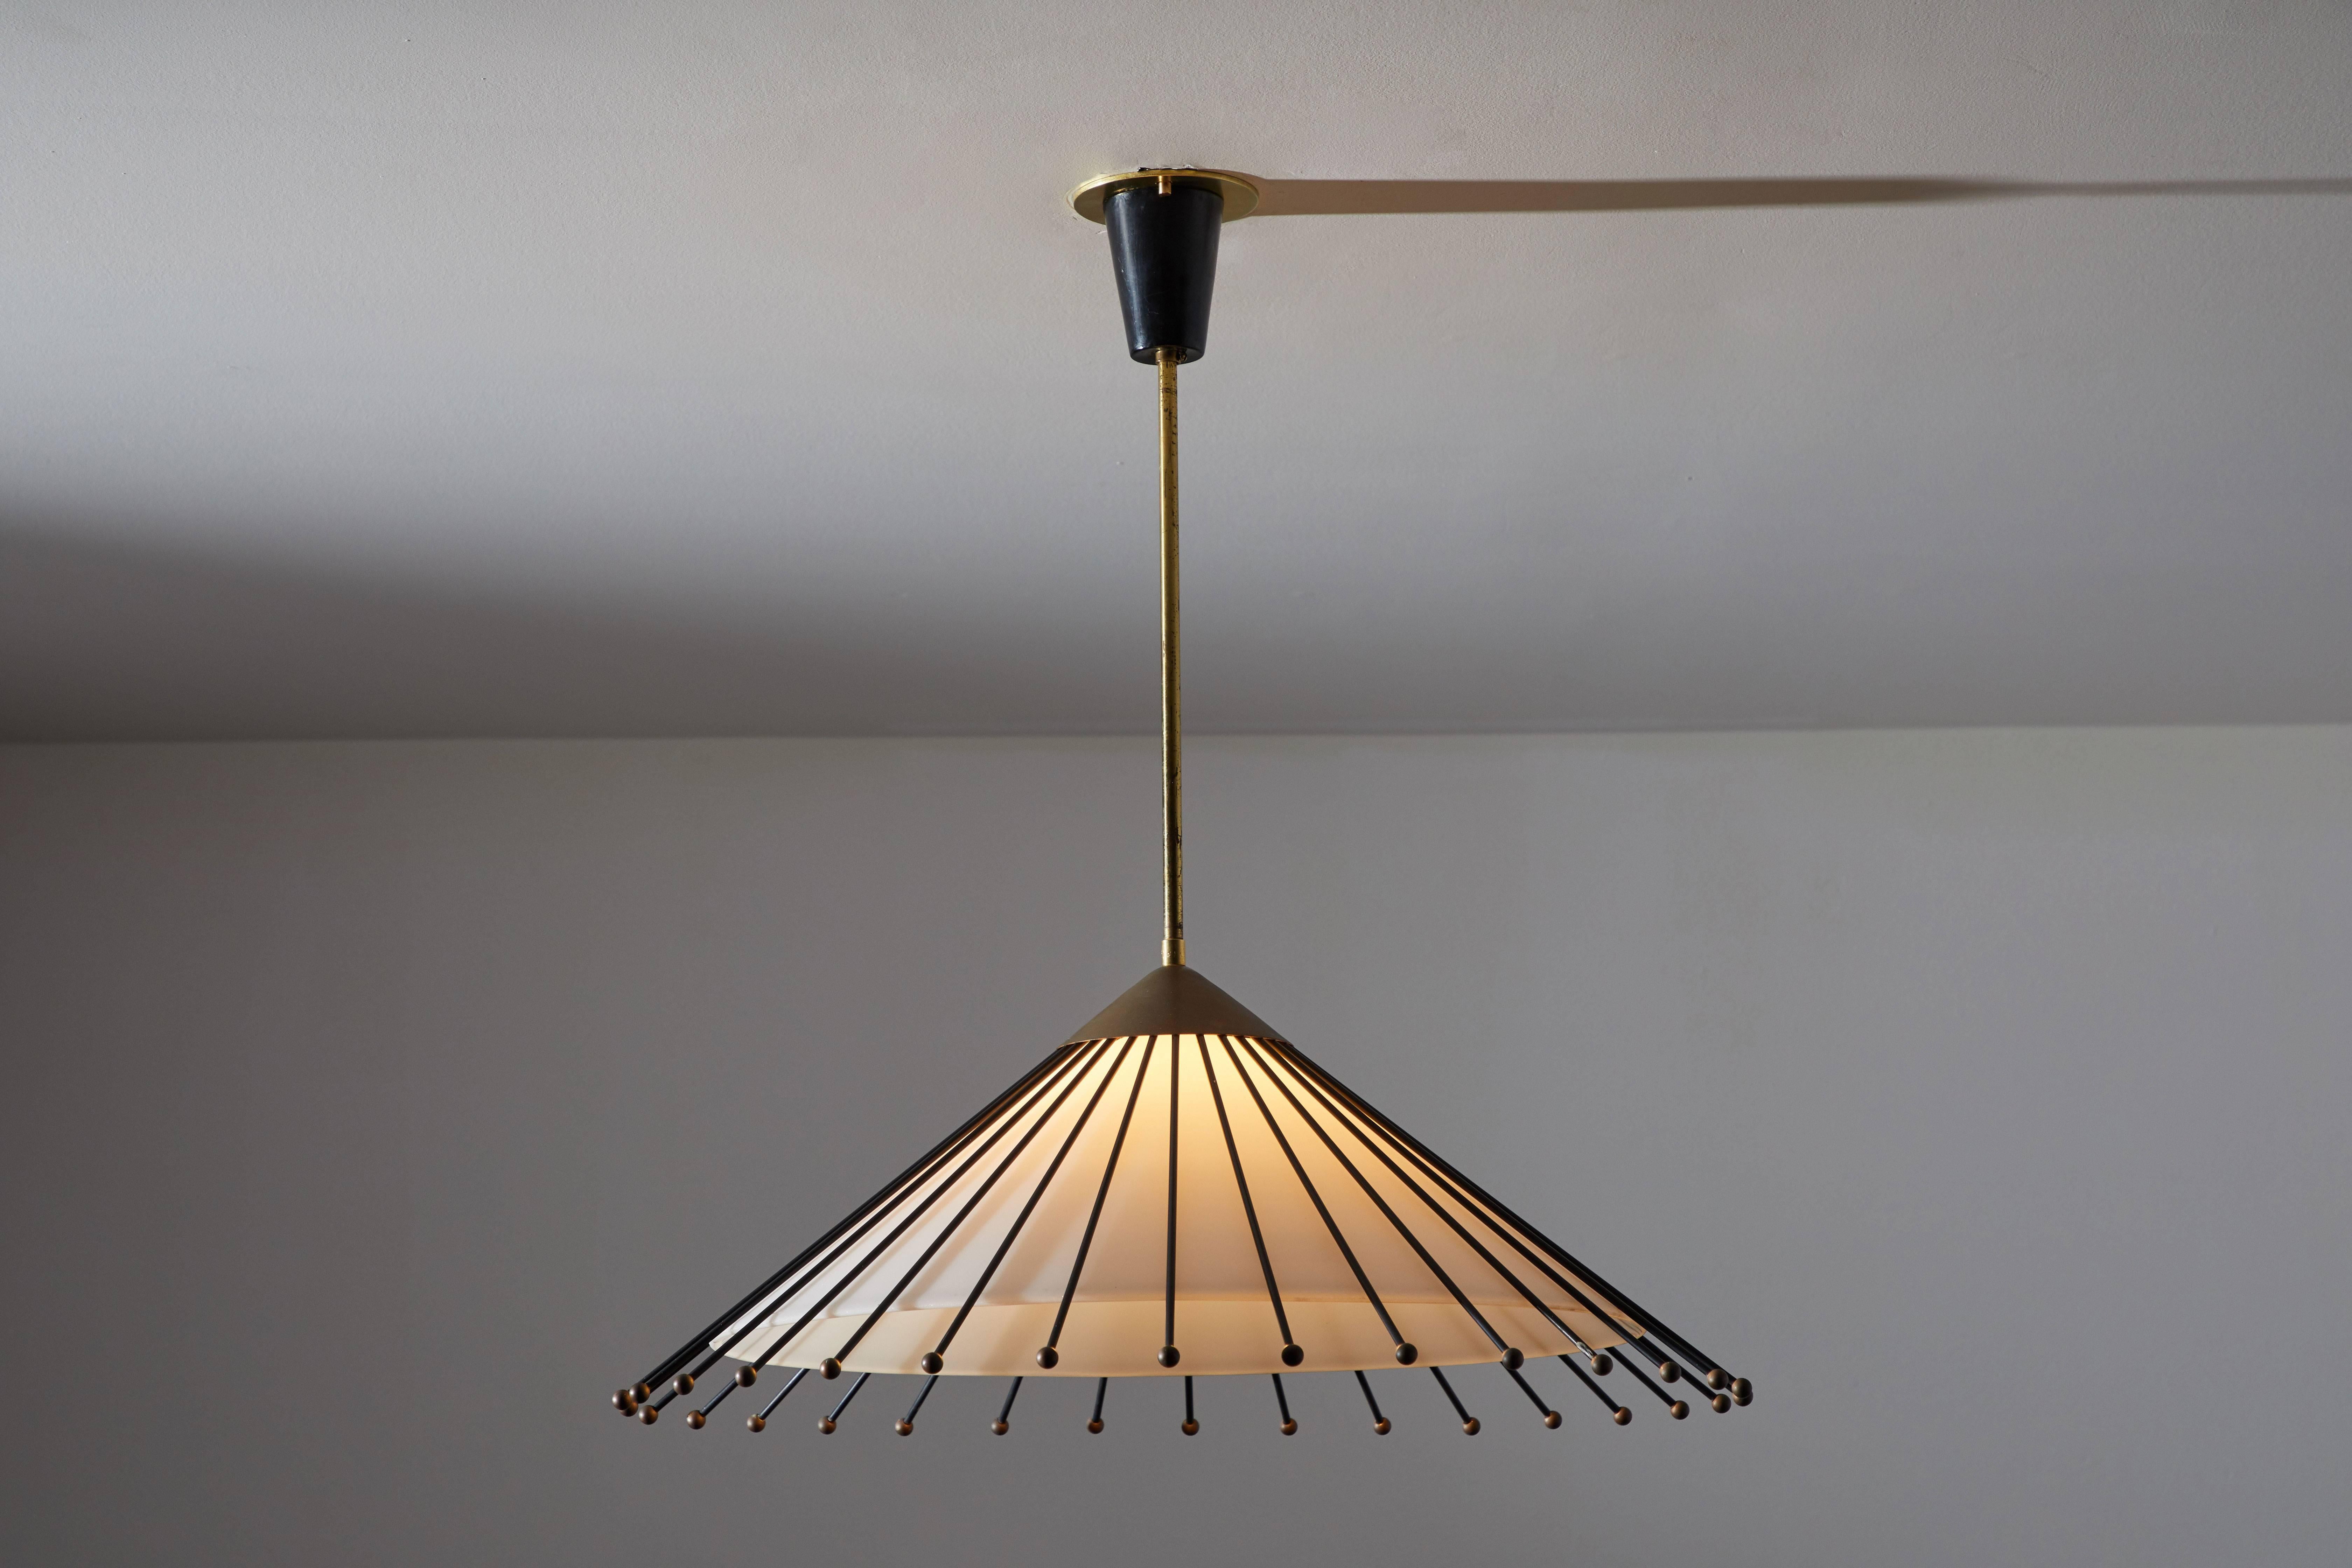 Italian pendant attributed to Arredoluce. Manufactured in Italy circa 1960s. Painted metal, opaline glass, brass. Wired for US junction boxes. Takes one E27 100w maximum bulb.